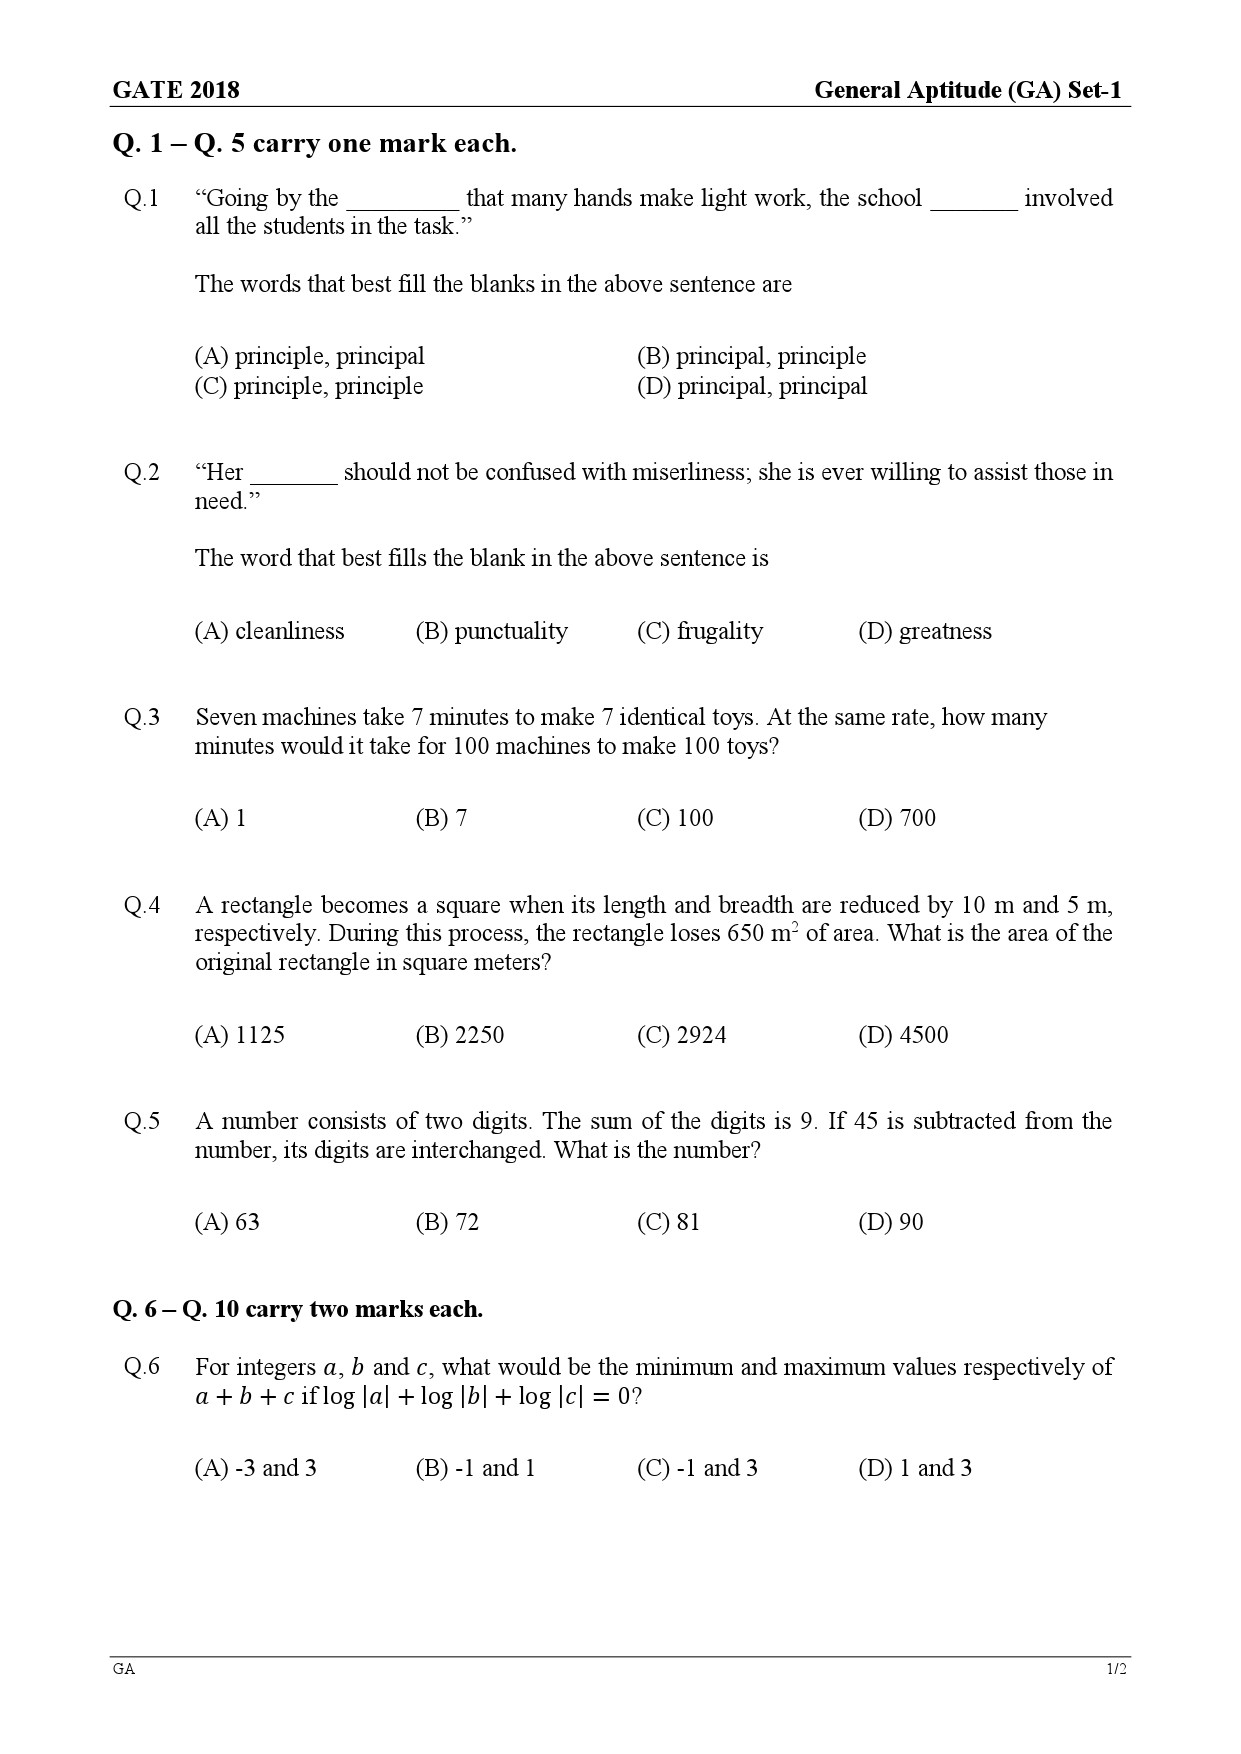 GATE Exam Question Paper 2018 Ecology and Evolution 1